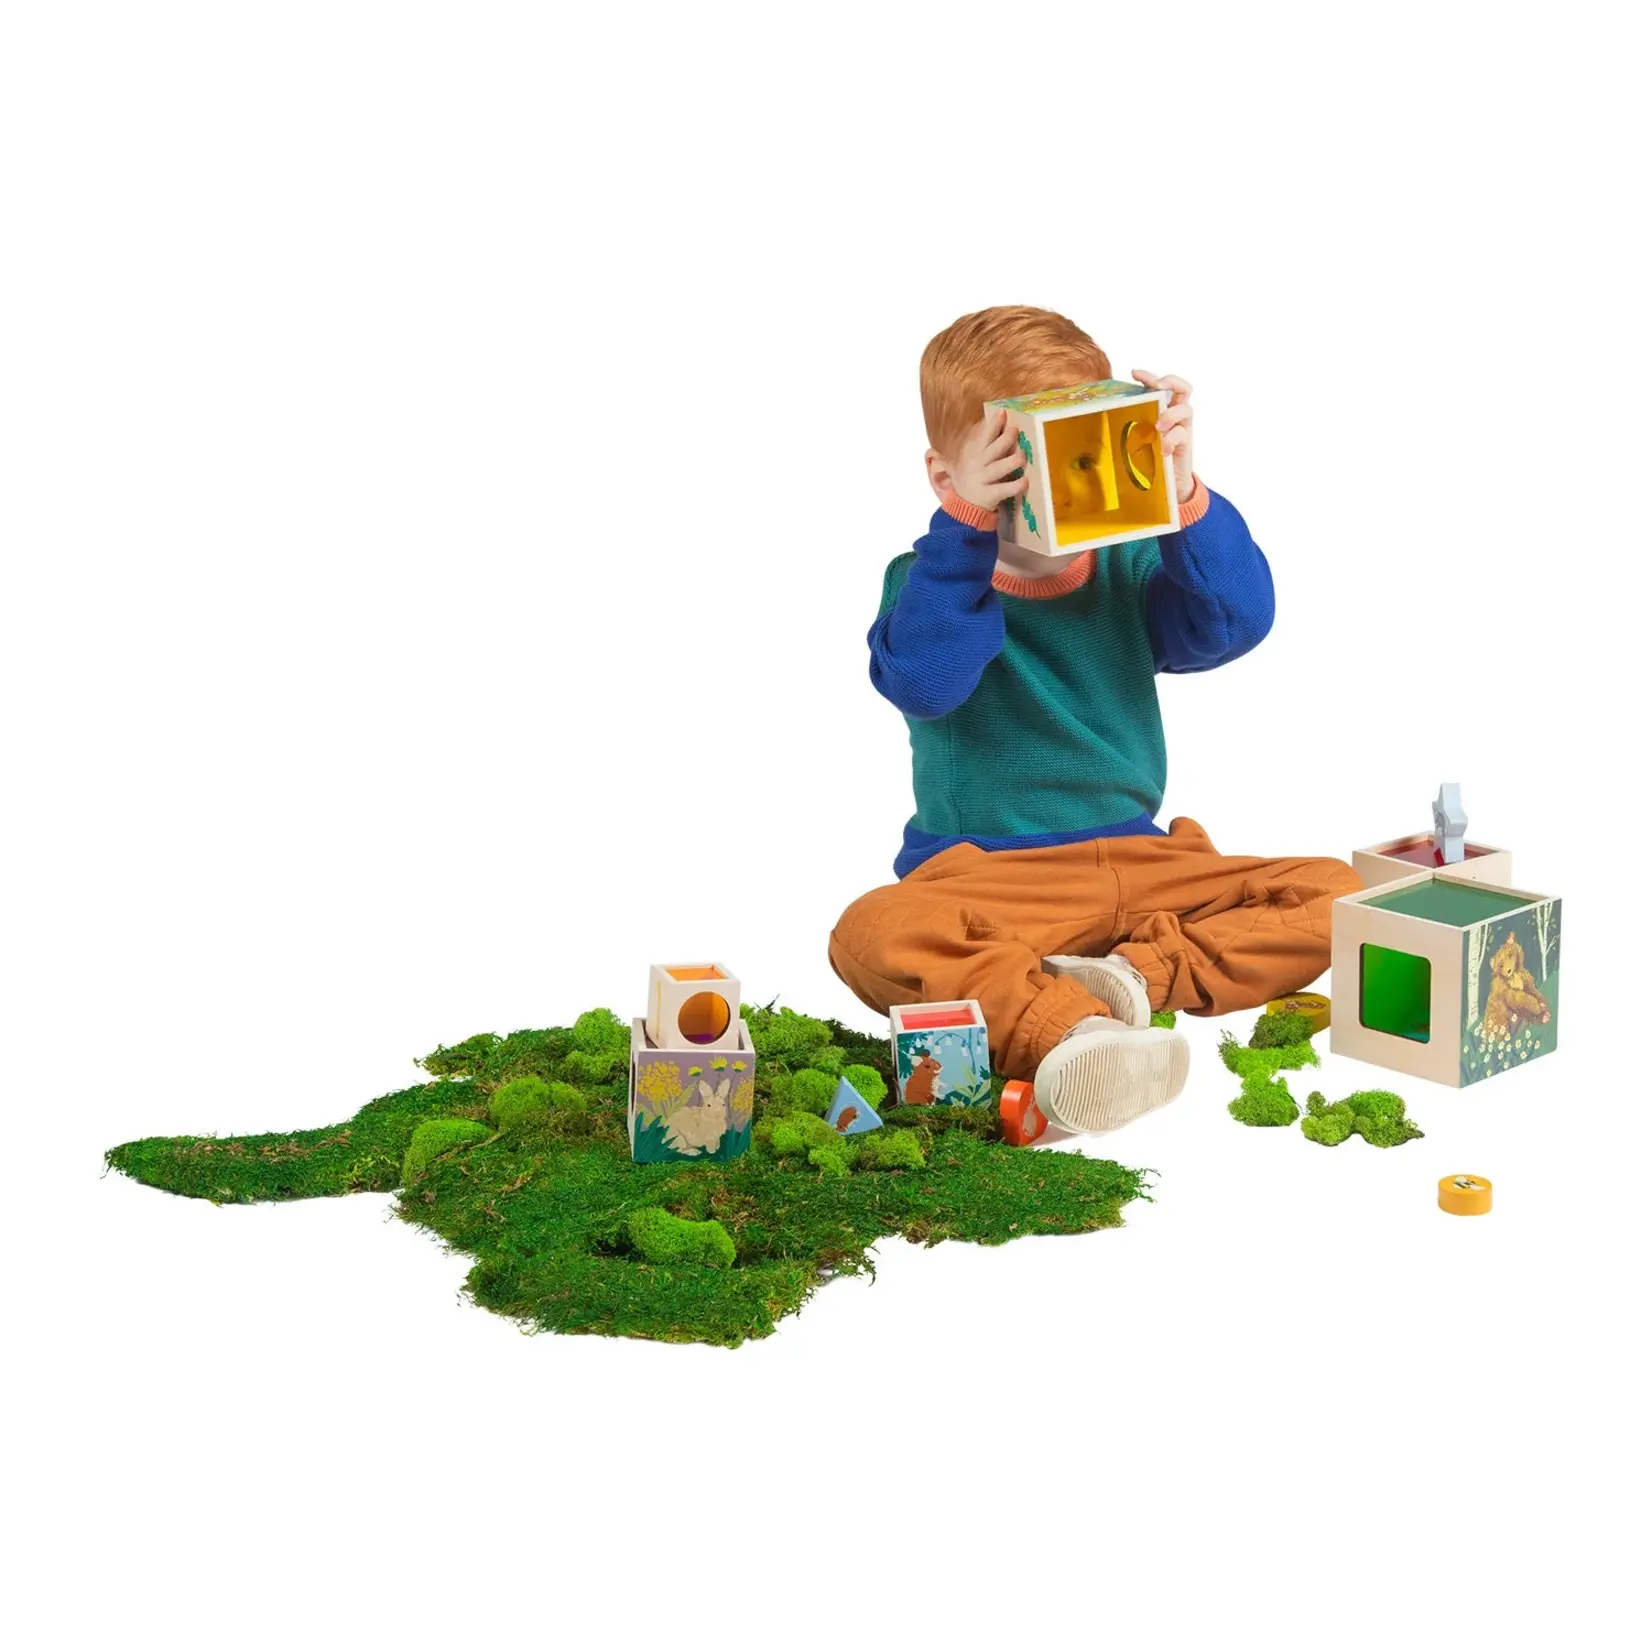 MANHATTAN TOY ENCHANTED FOREST STACKING BLOCKS